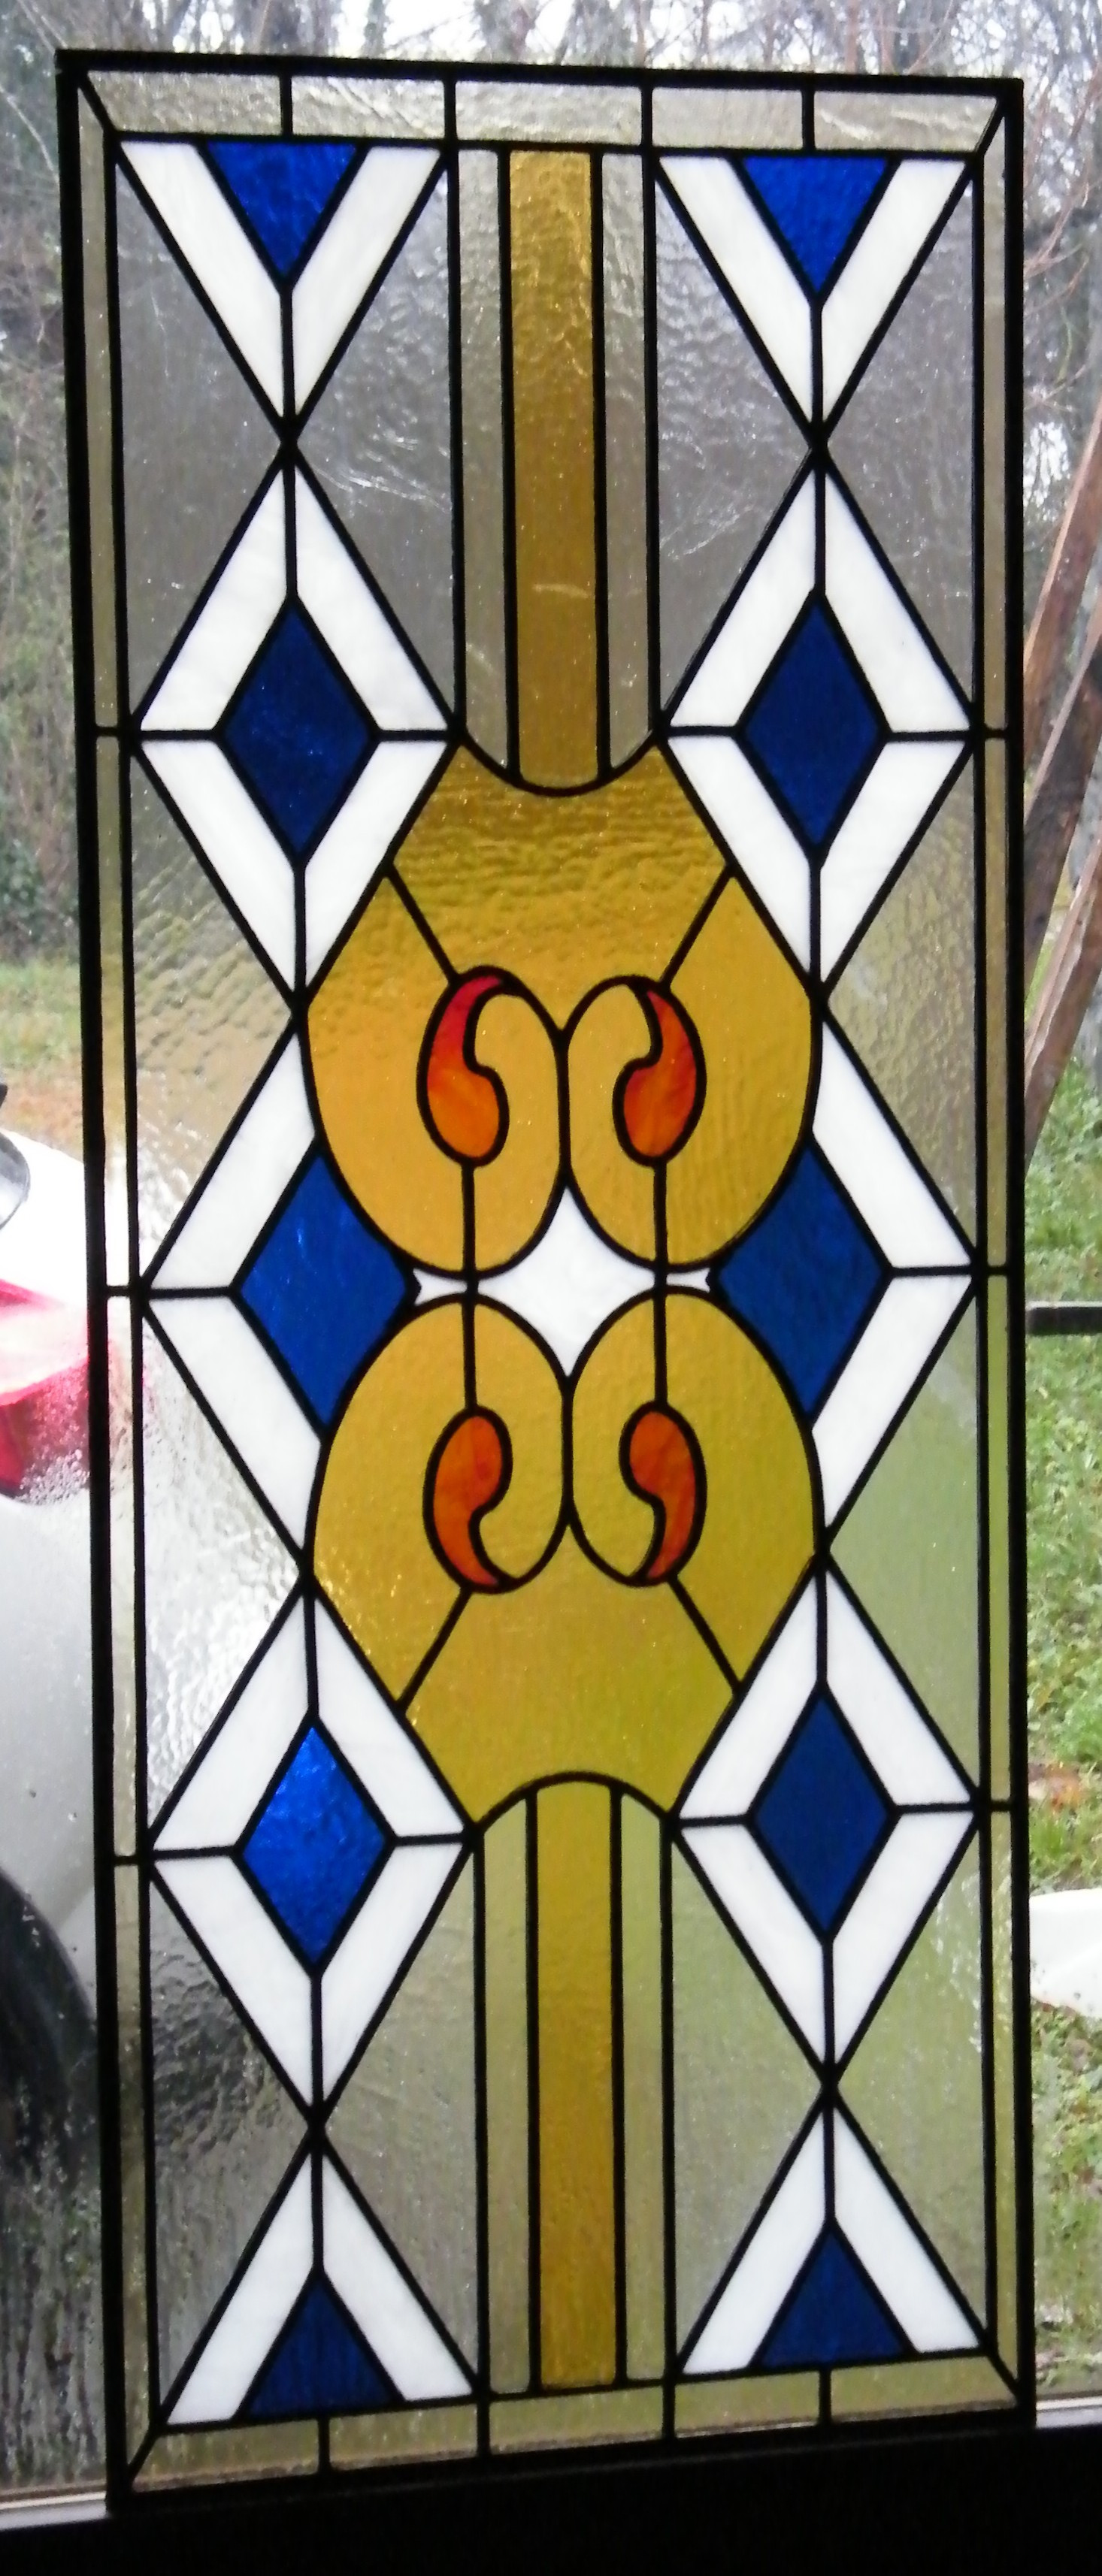 January's Stained Glass Course Alf